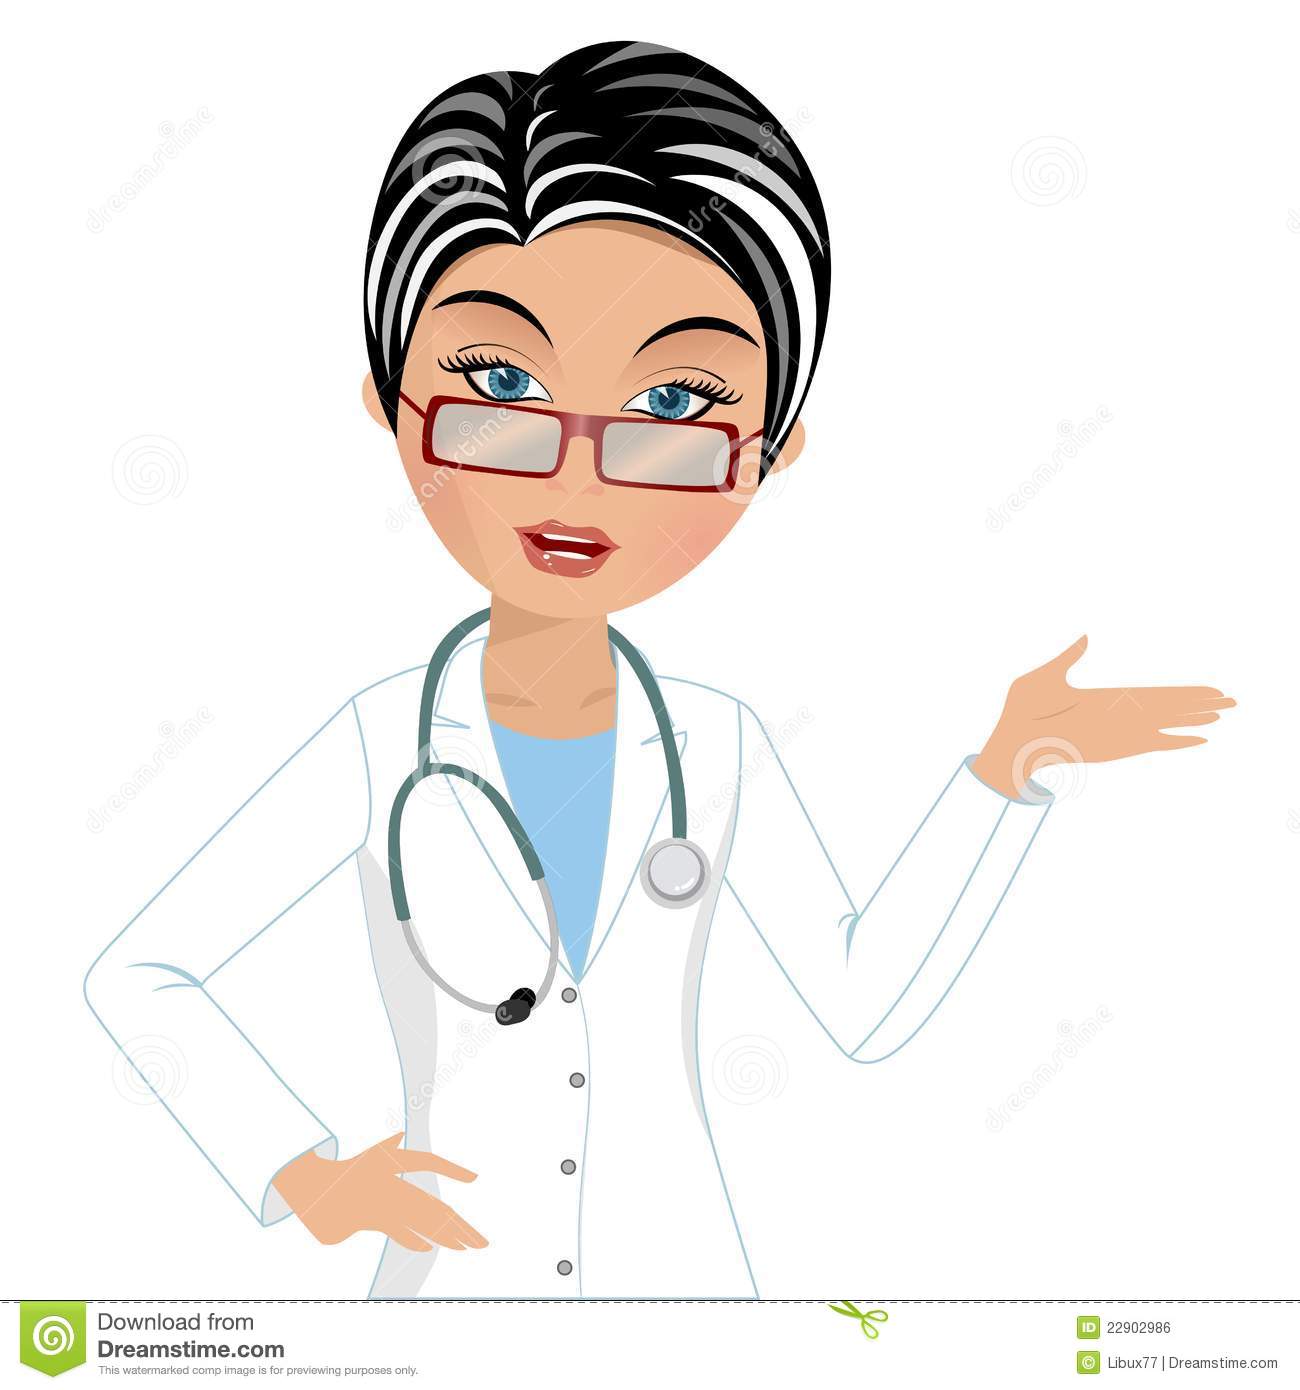 Illustration Of A Female Doctor Speaking Indicating And Isolated On